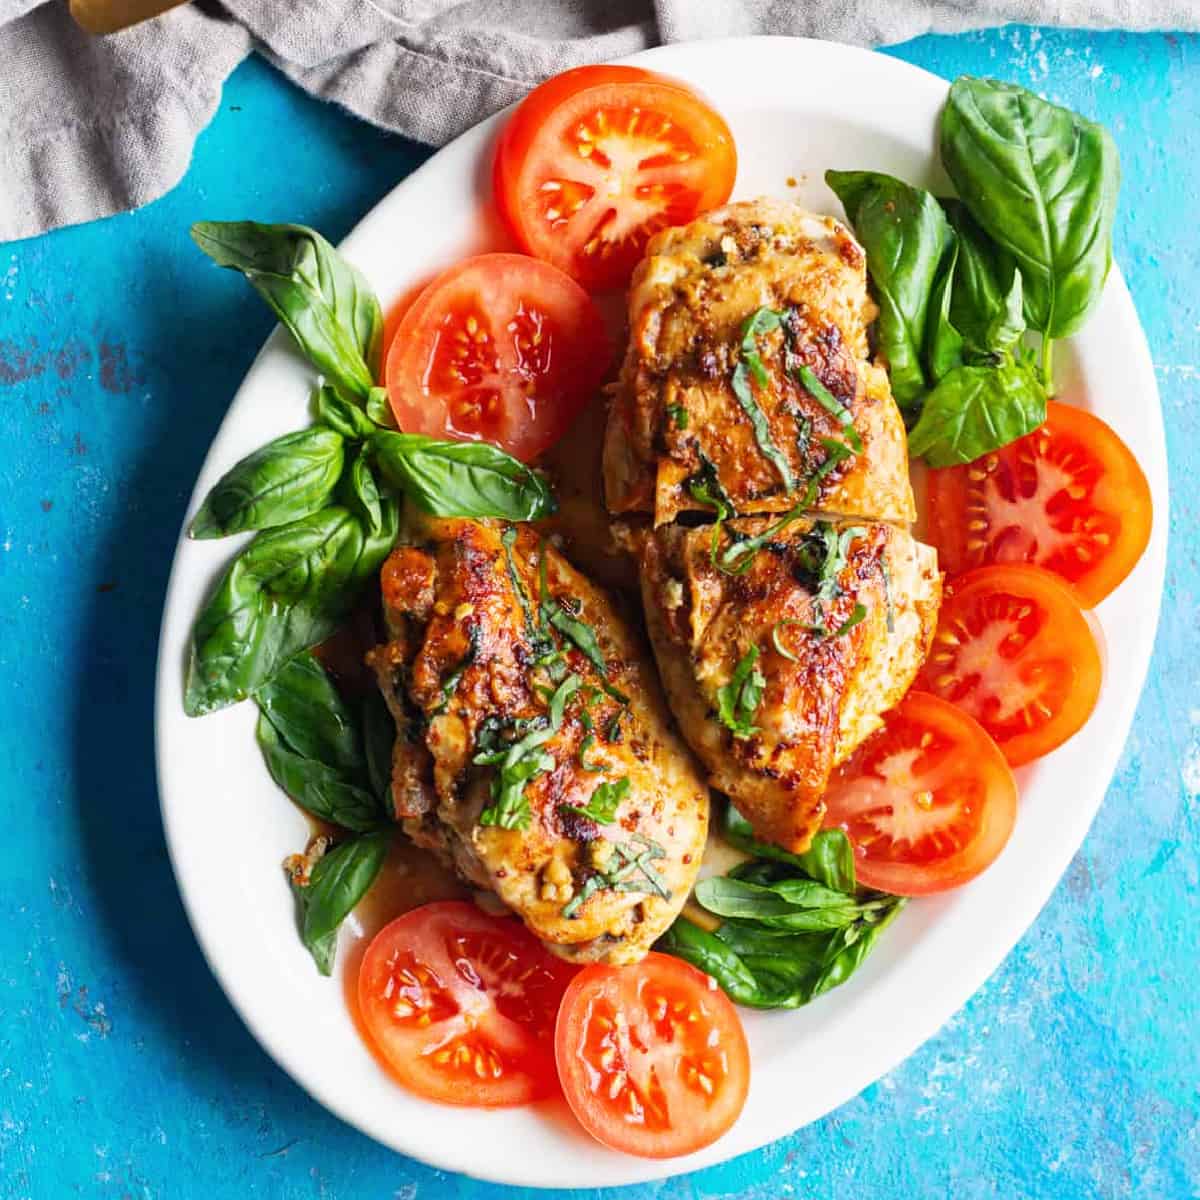 Caprese stuffed chicken breast is easy and packed with flavor. Juicy chicken breast stuffed with cheese, tomatoes and basil makes a delicious meal. 
